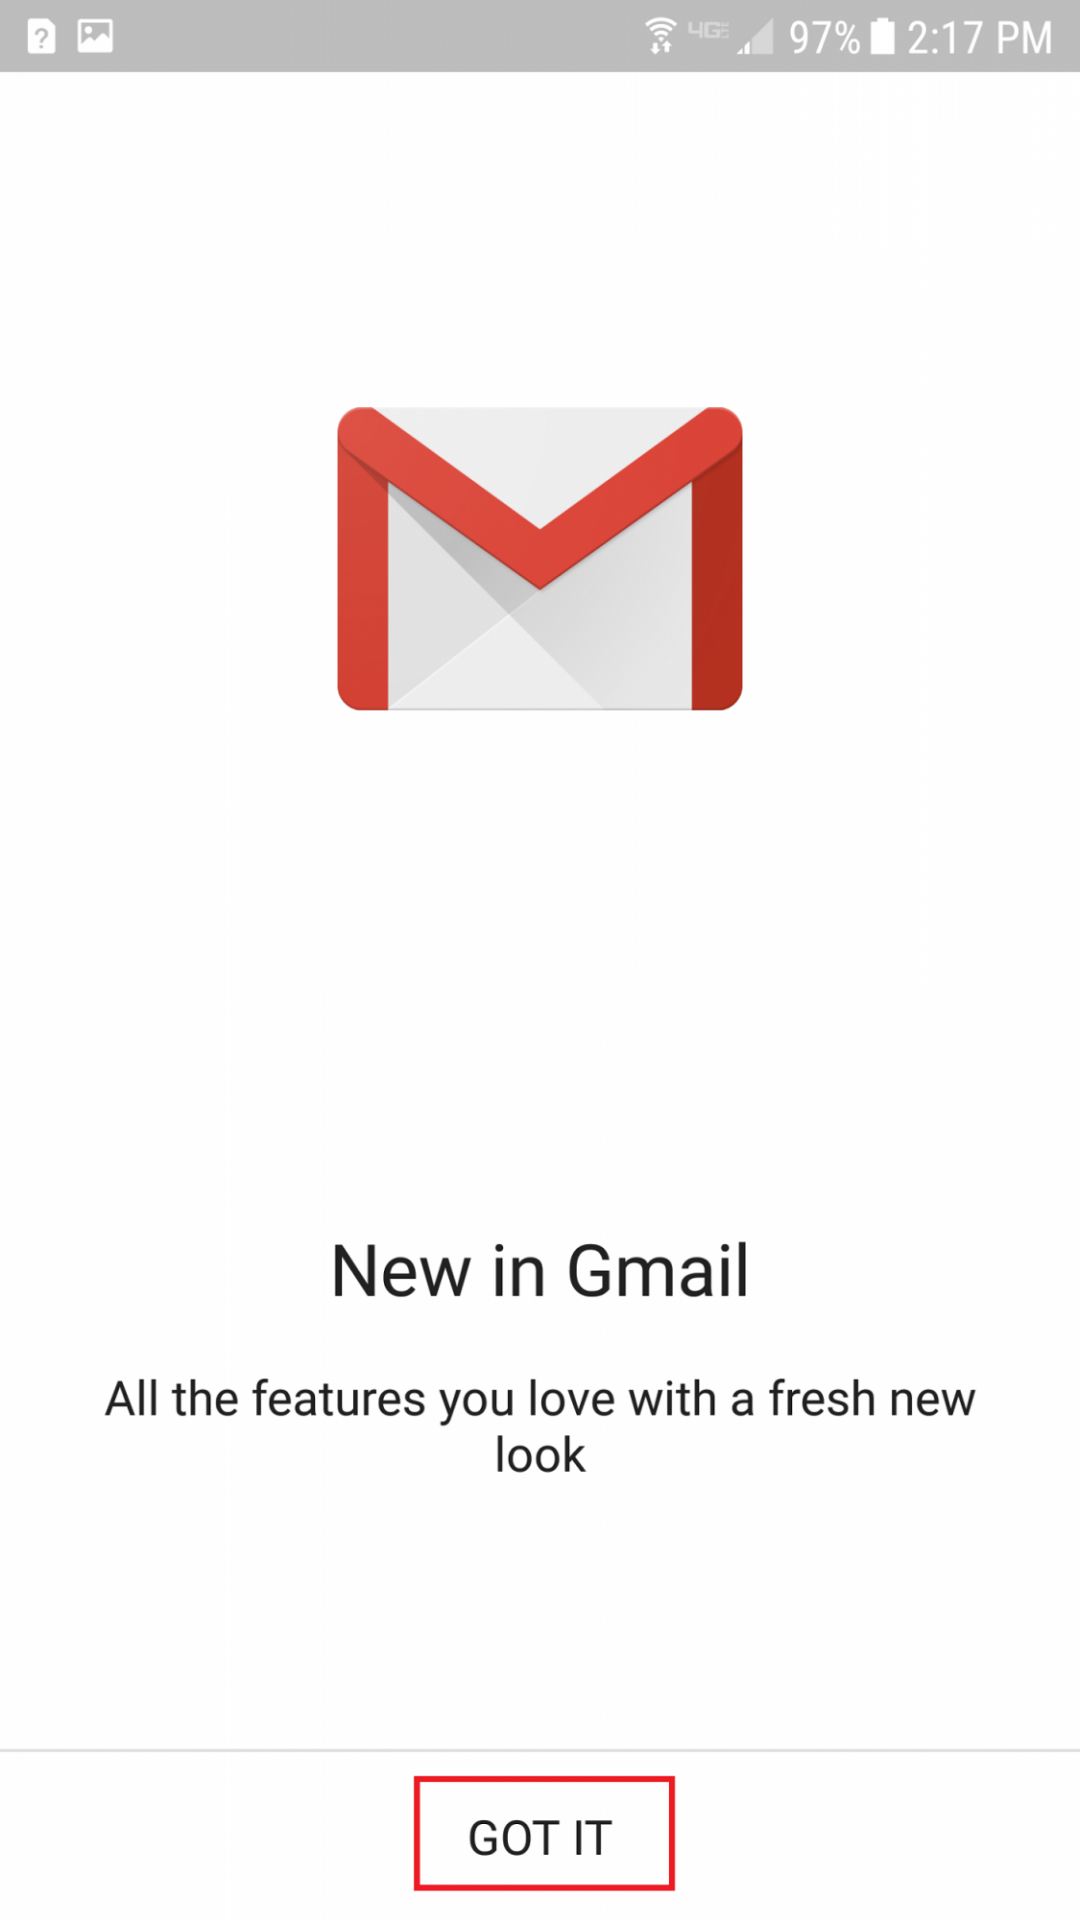 New in Gmail screen with GOT IT button at bottom